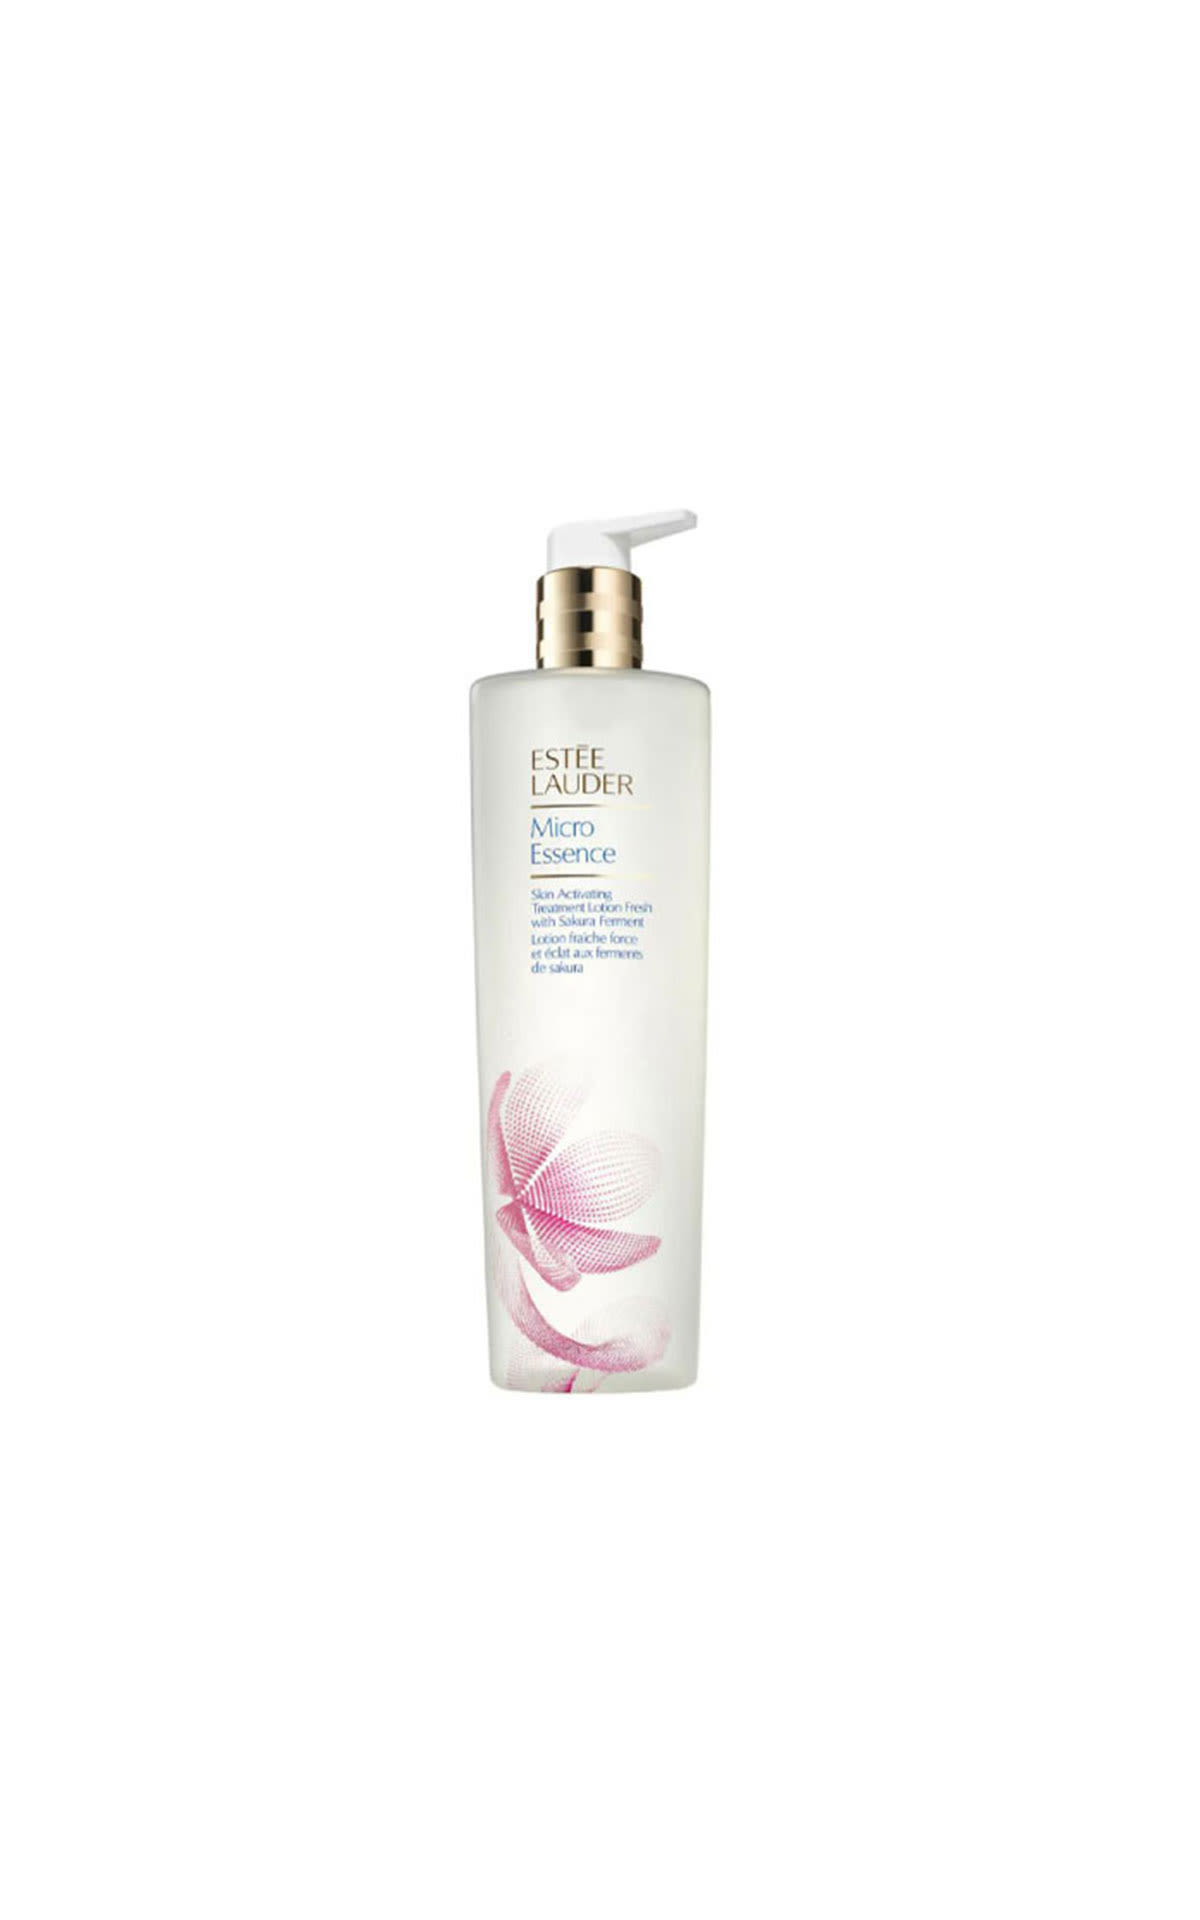 The Cosmetics Company Store Estee Lauder micro essence skin activating treatment lotion fresh from Bicester Village